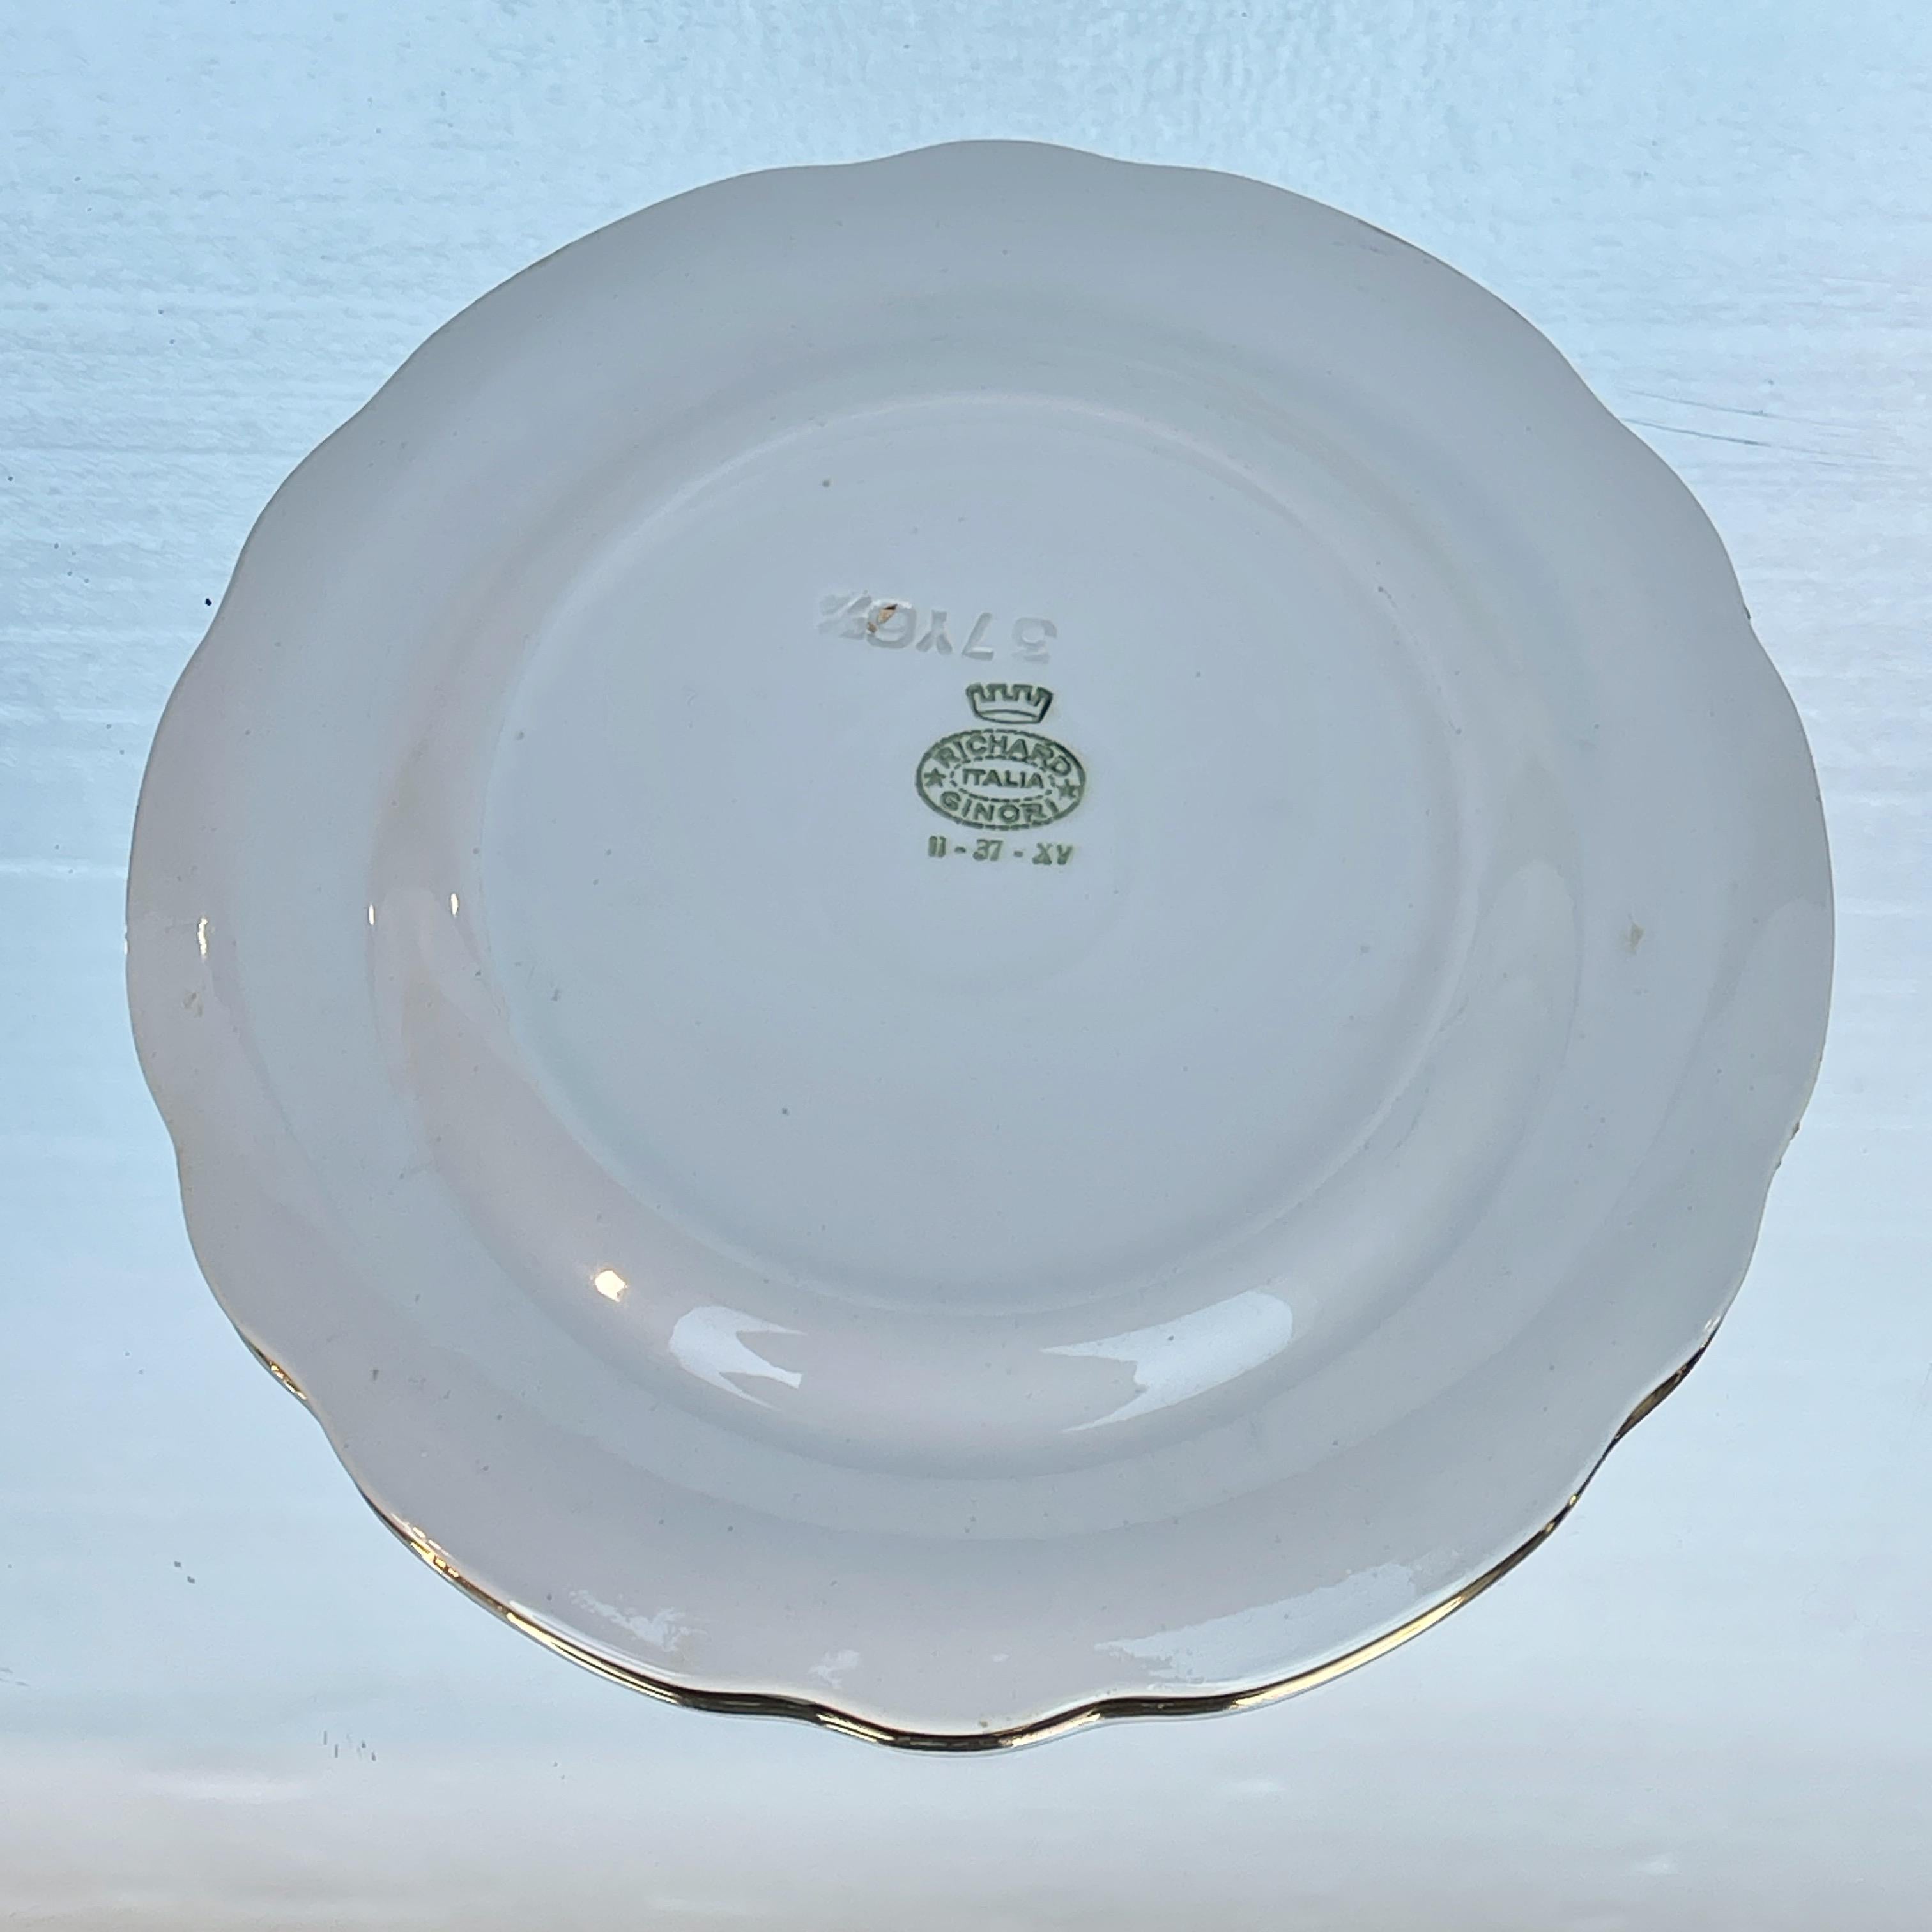 Gio Ponti for Richard Ginori Le Mie Donne Plate 1937 In Good Condition For Sale In Hanover, MA